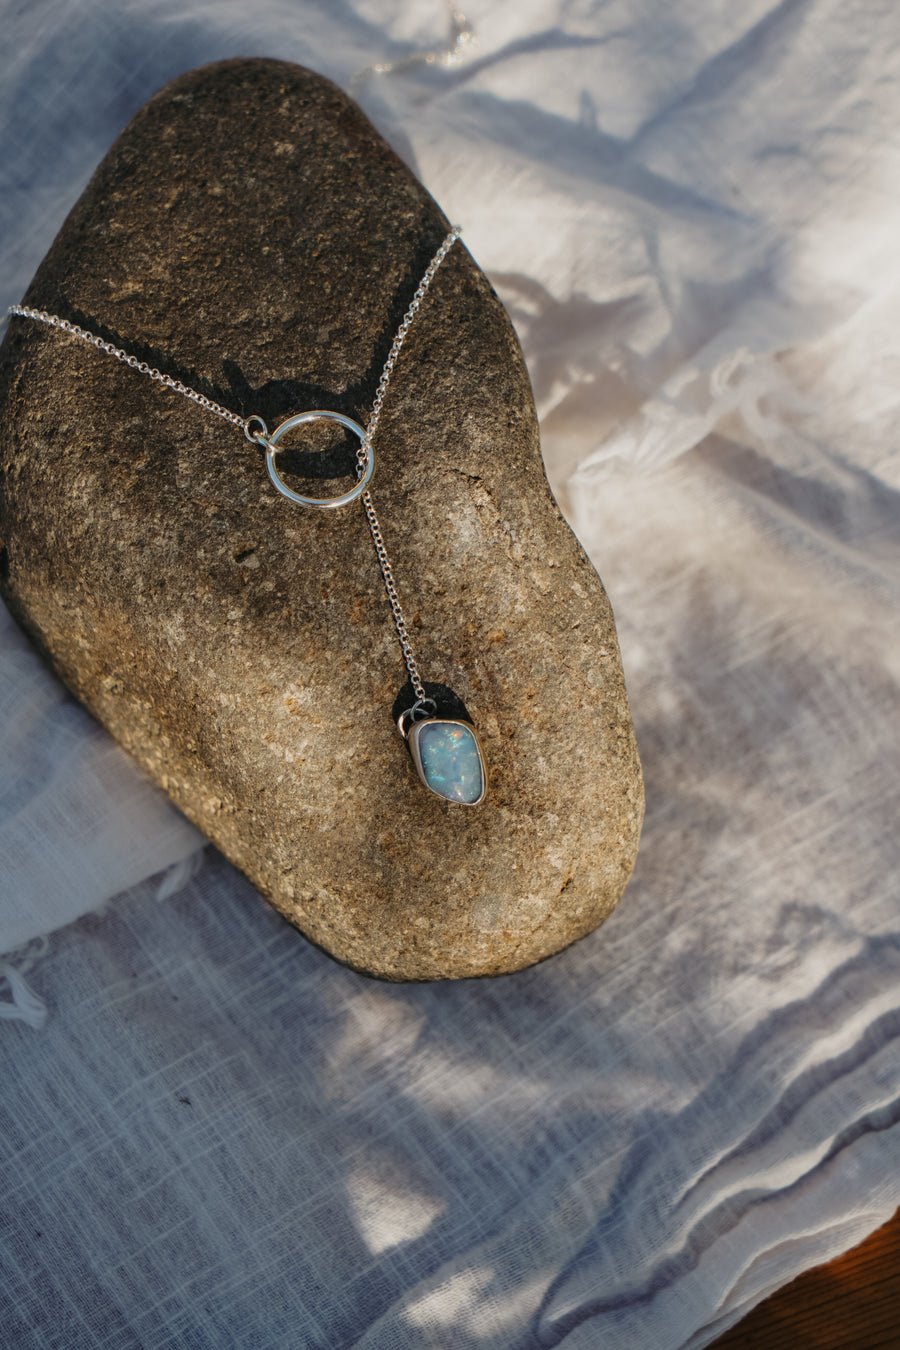 The Dainty Lariat in Boulder Opal Doublet